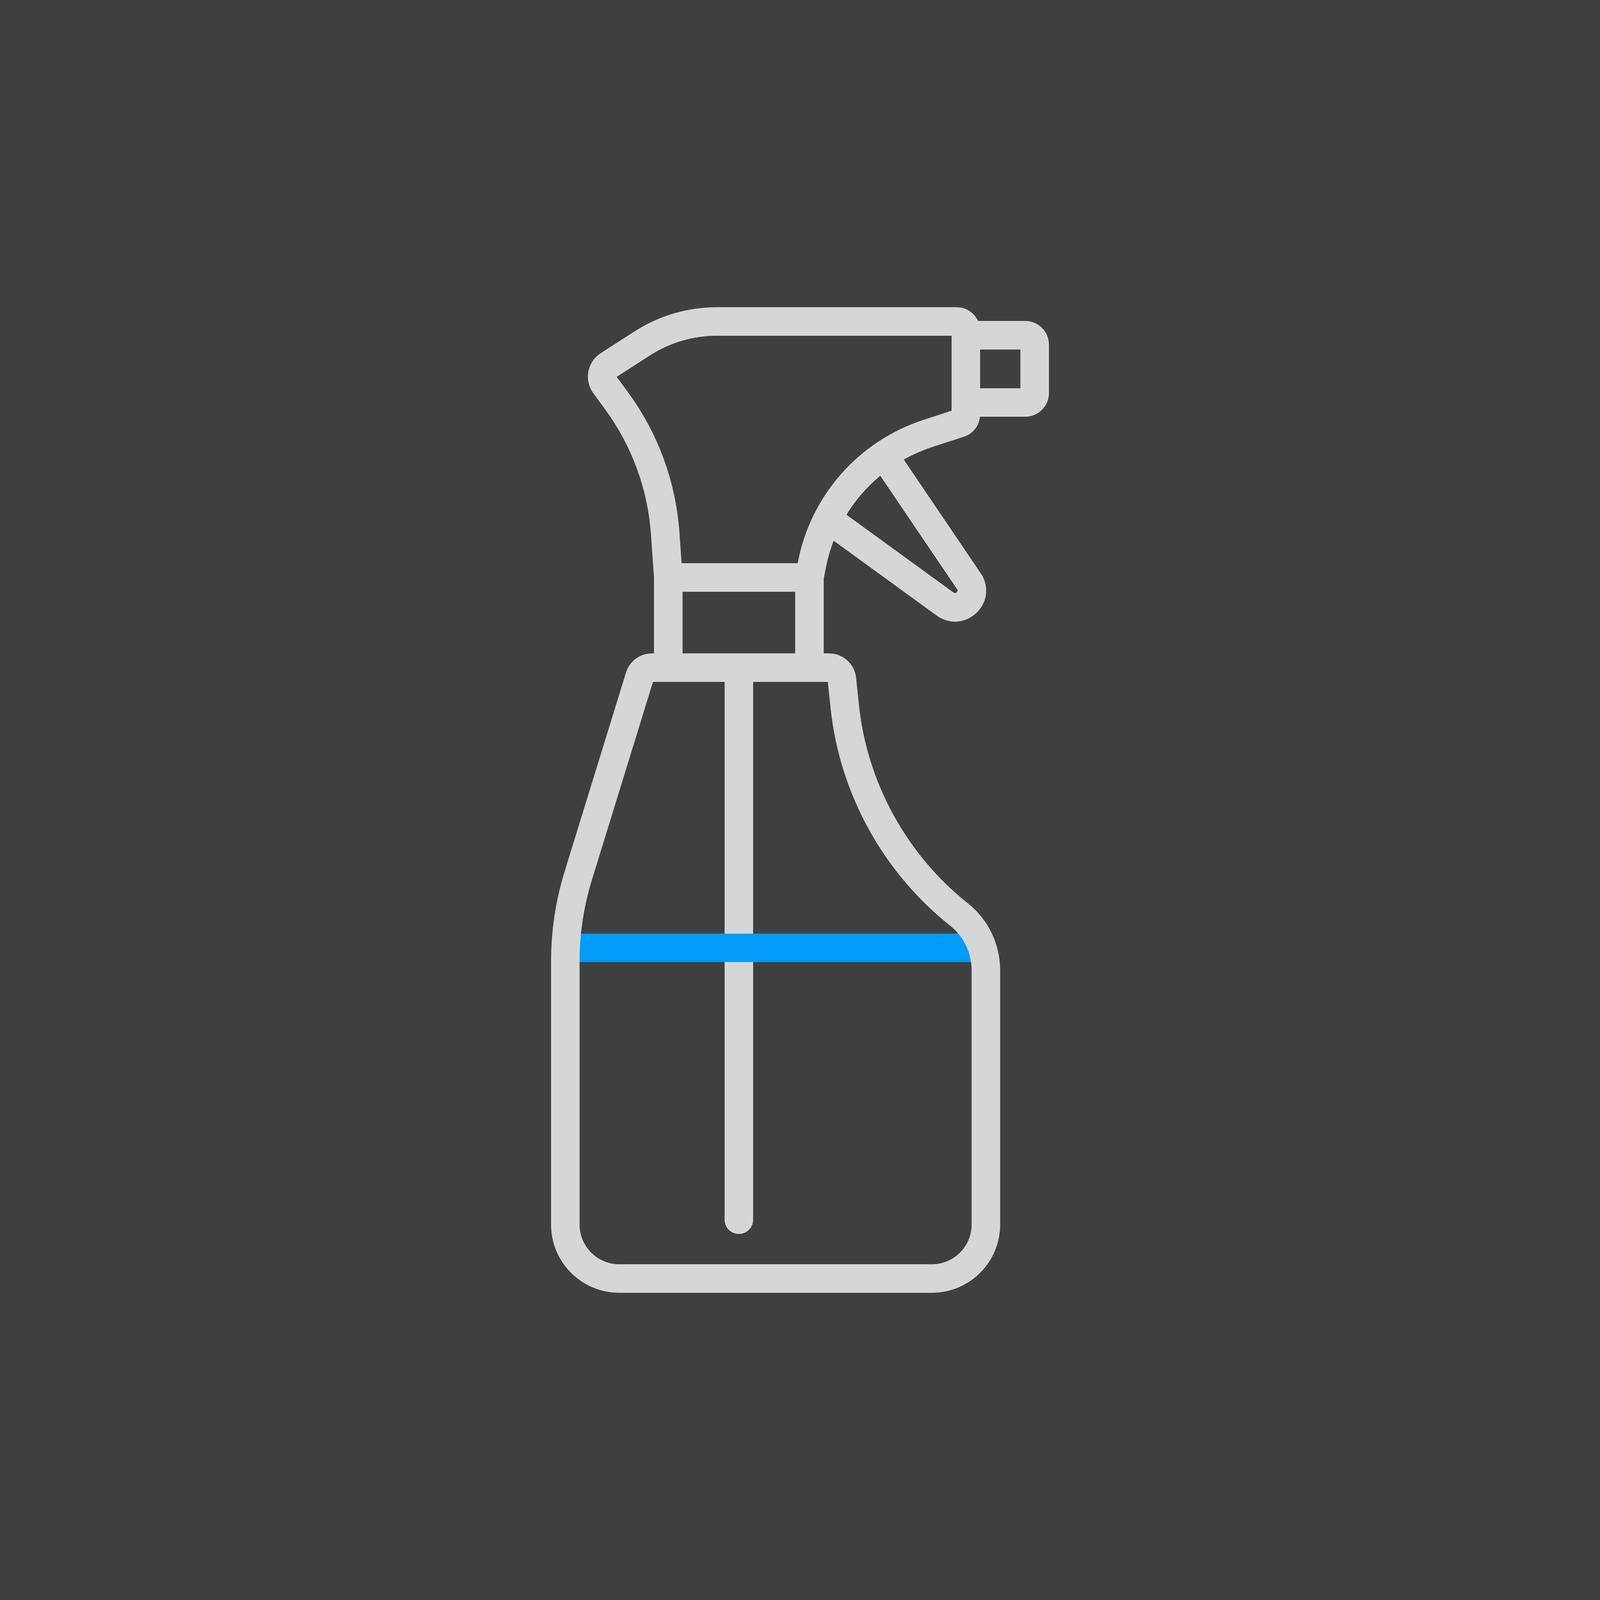 Cleaning spray bottle vector icon. Coronavirus. Graph symbol for medical web site and apps design, logo, app, UI